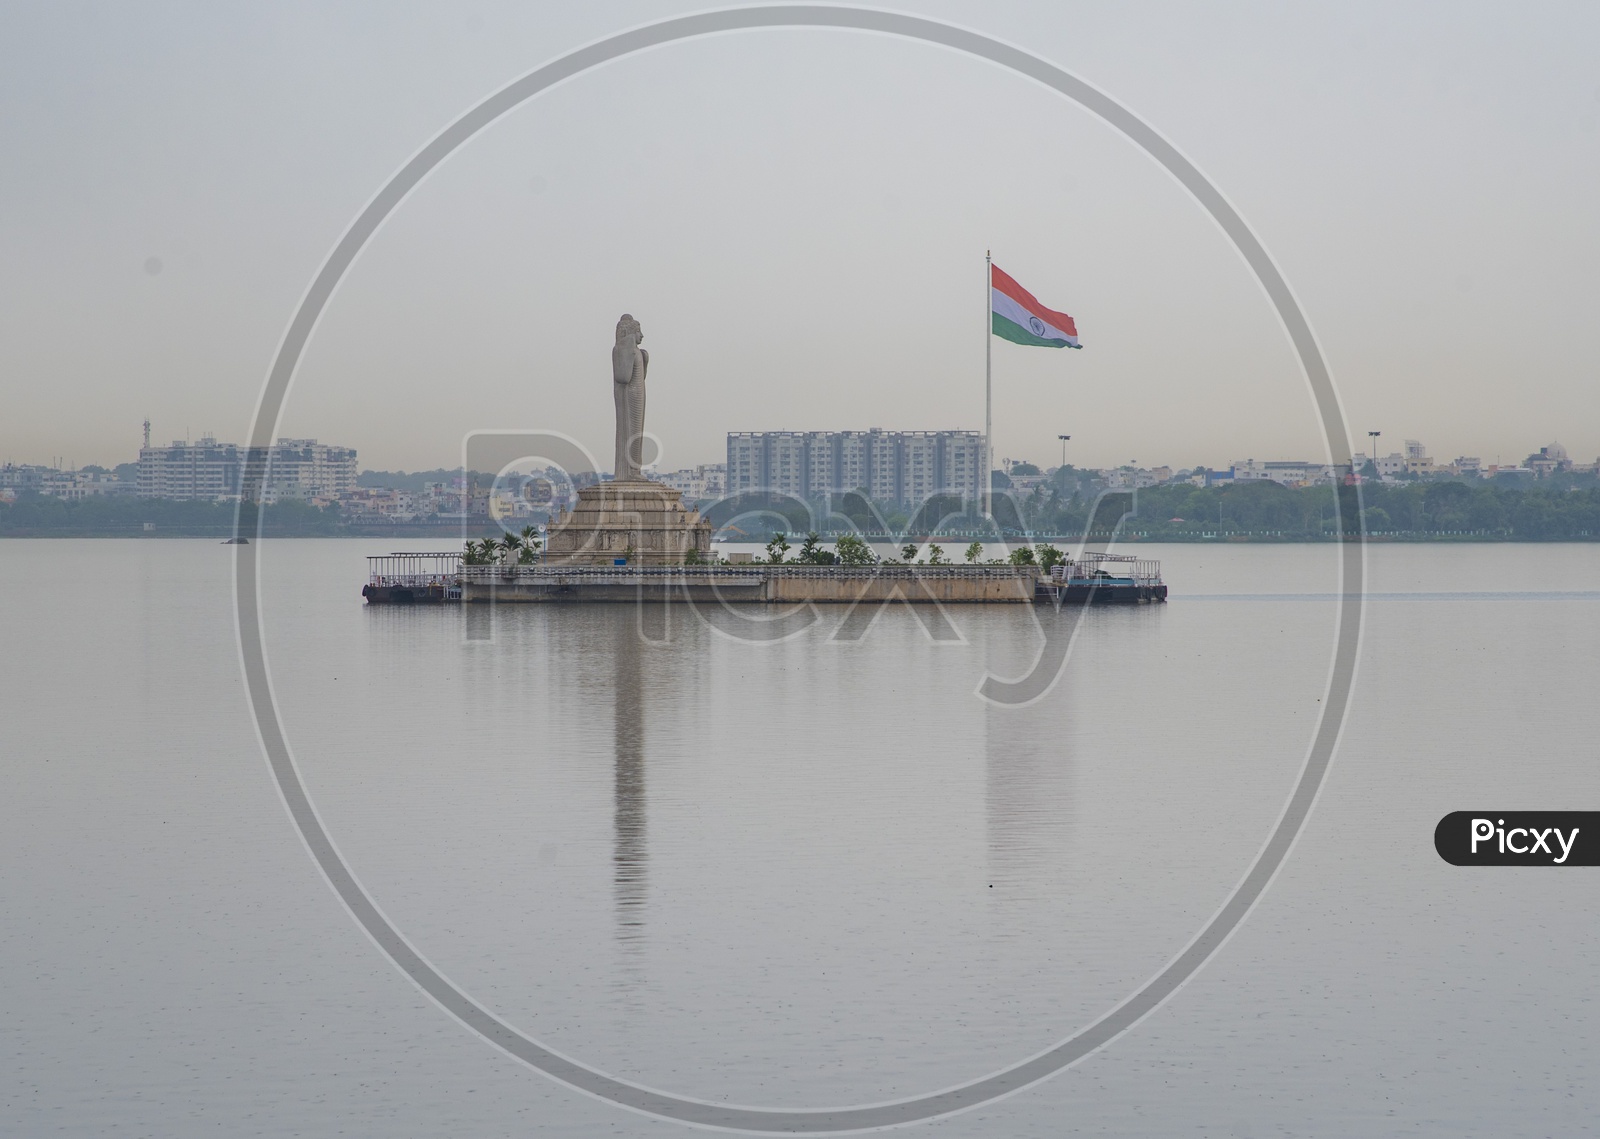 Buddha Statue on Hussain Sagar Lake with the Indian Flag in background